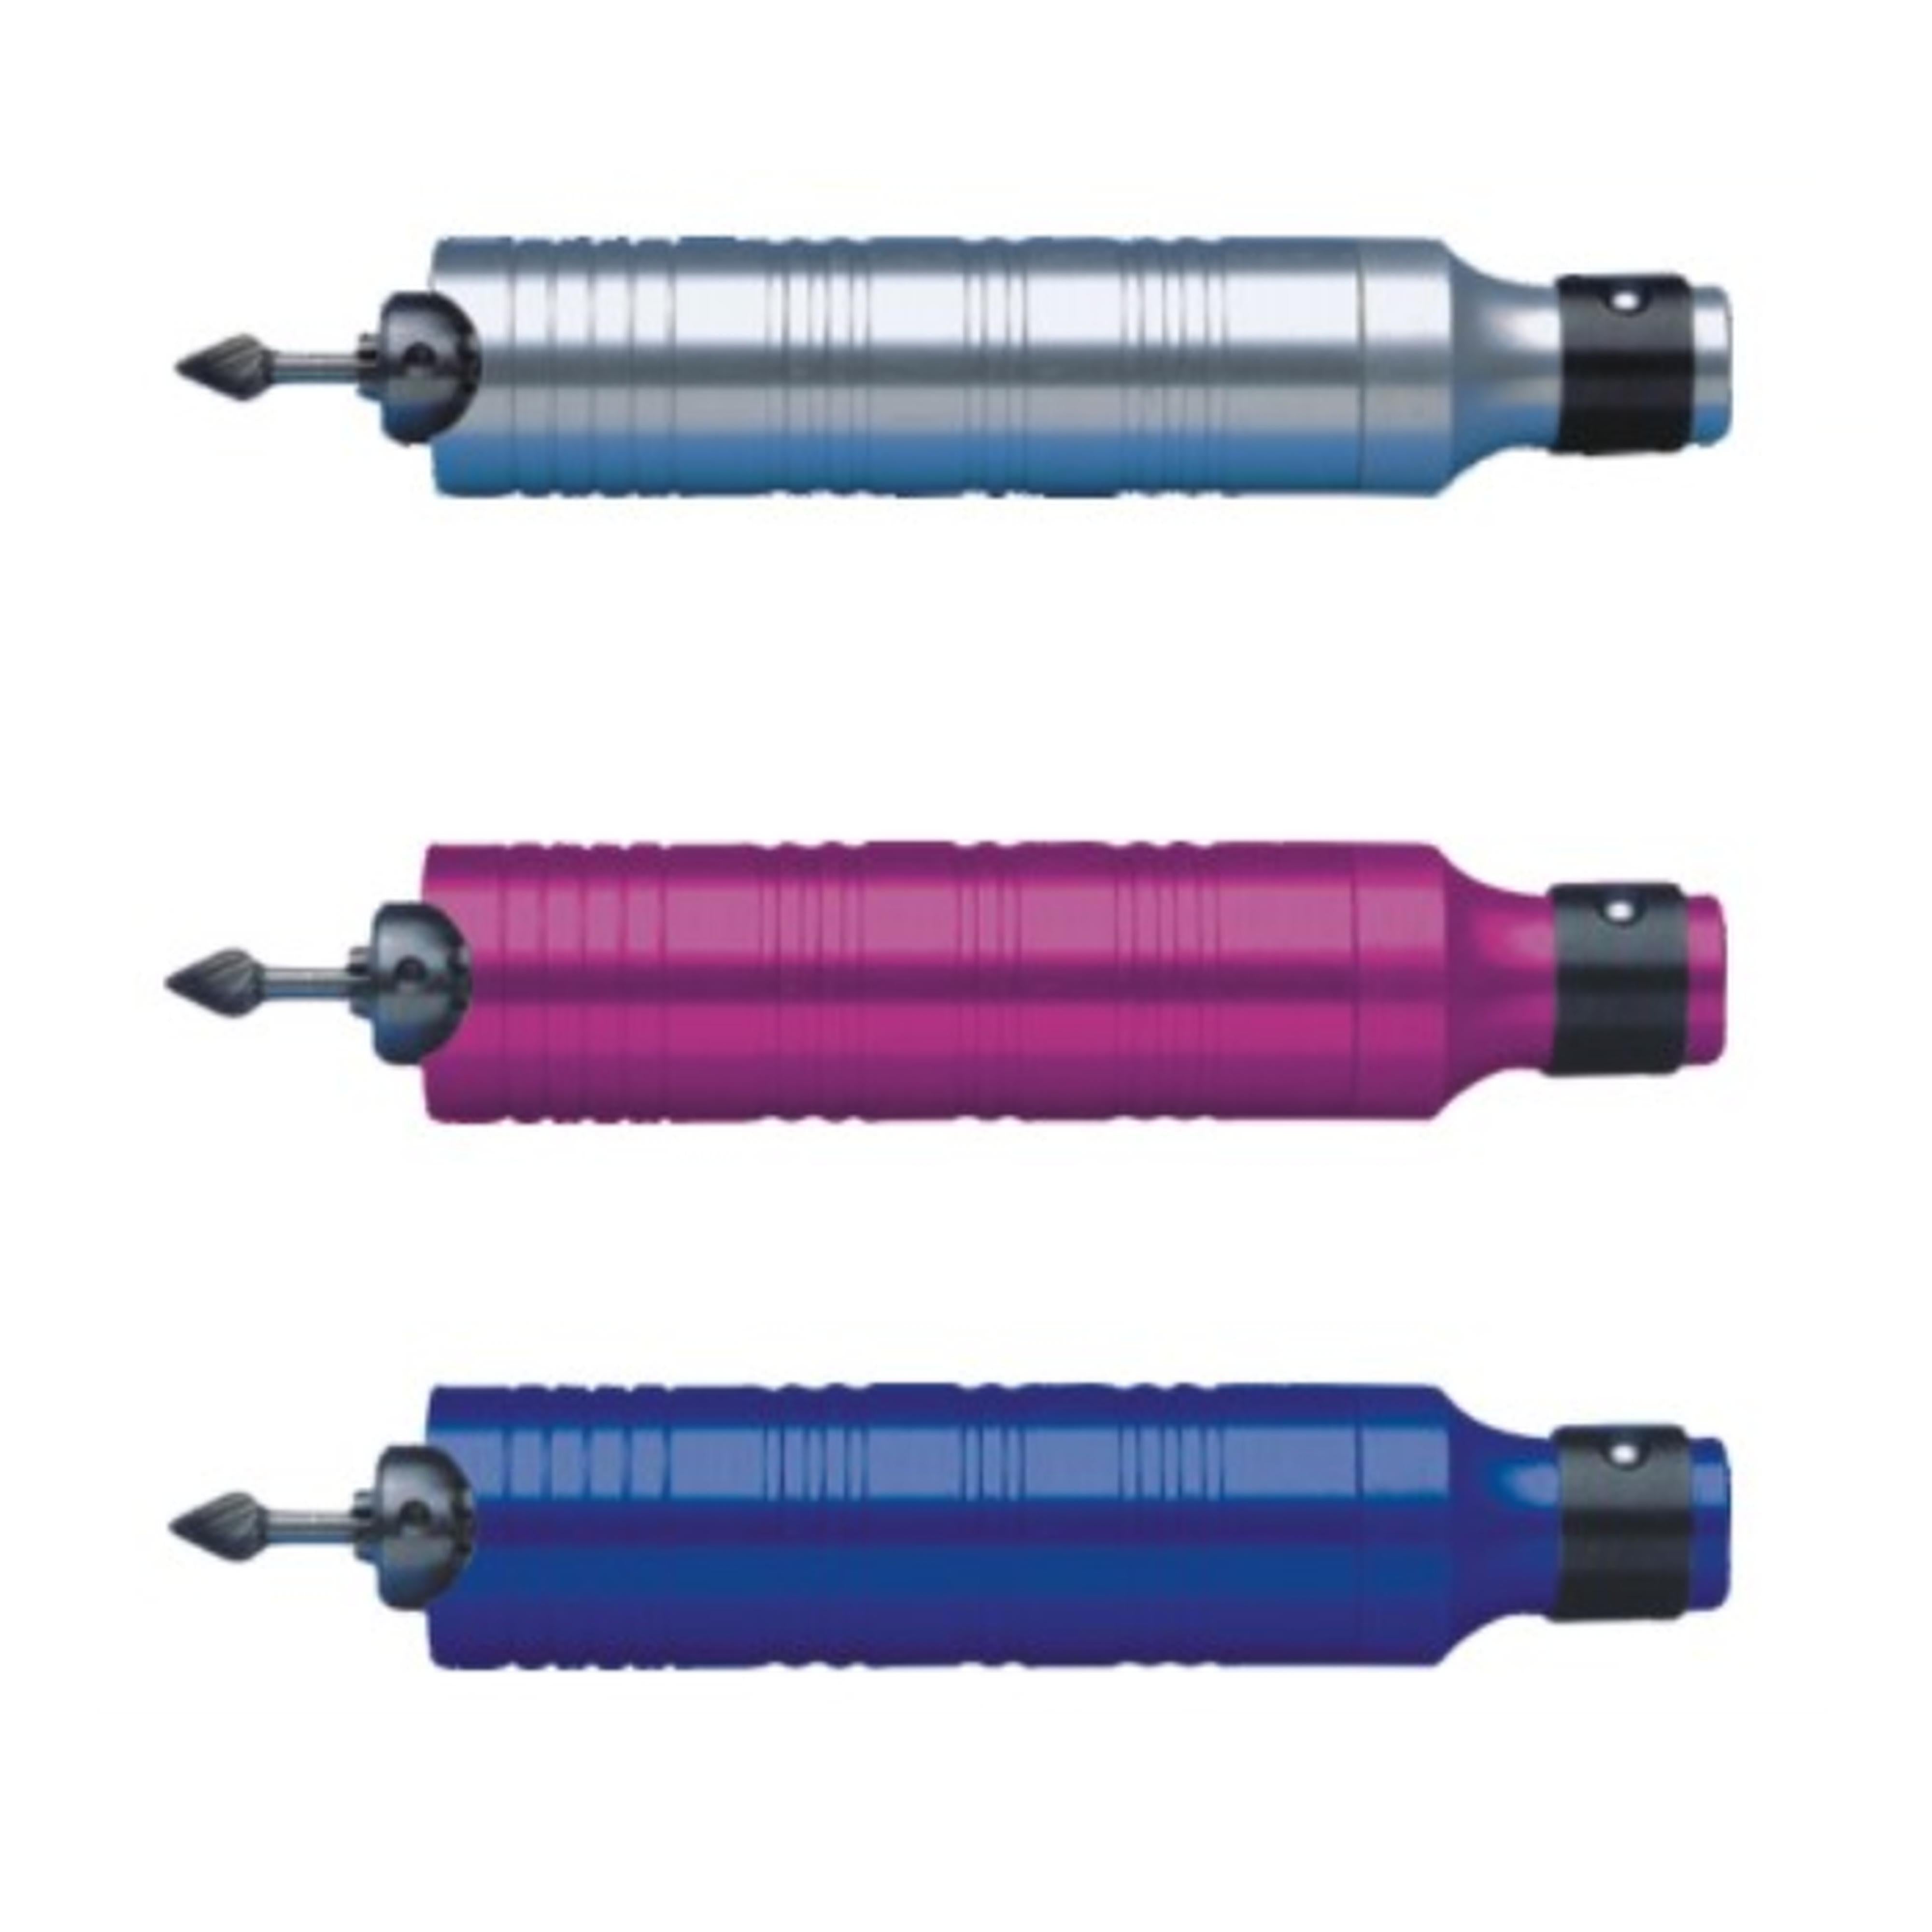 Mold Shop Tools - FOREDOM ROTARY HANDPIECES & COLLETS